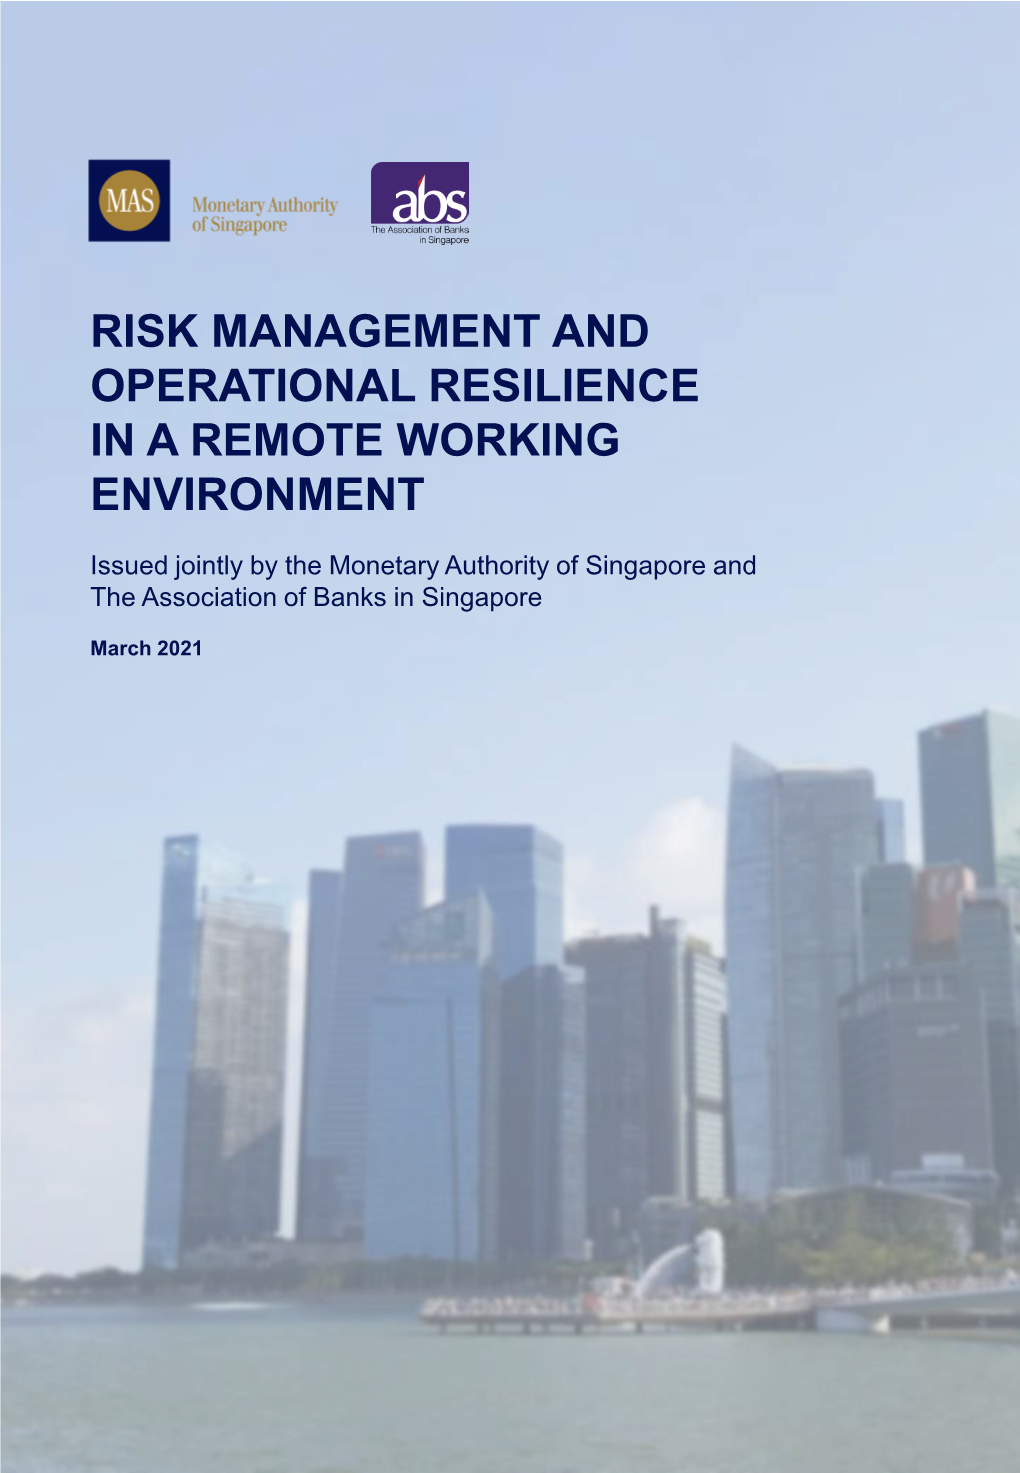 Risk Management and Operational Resilience in a Remote Working Environment